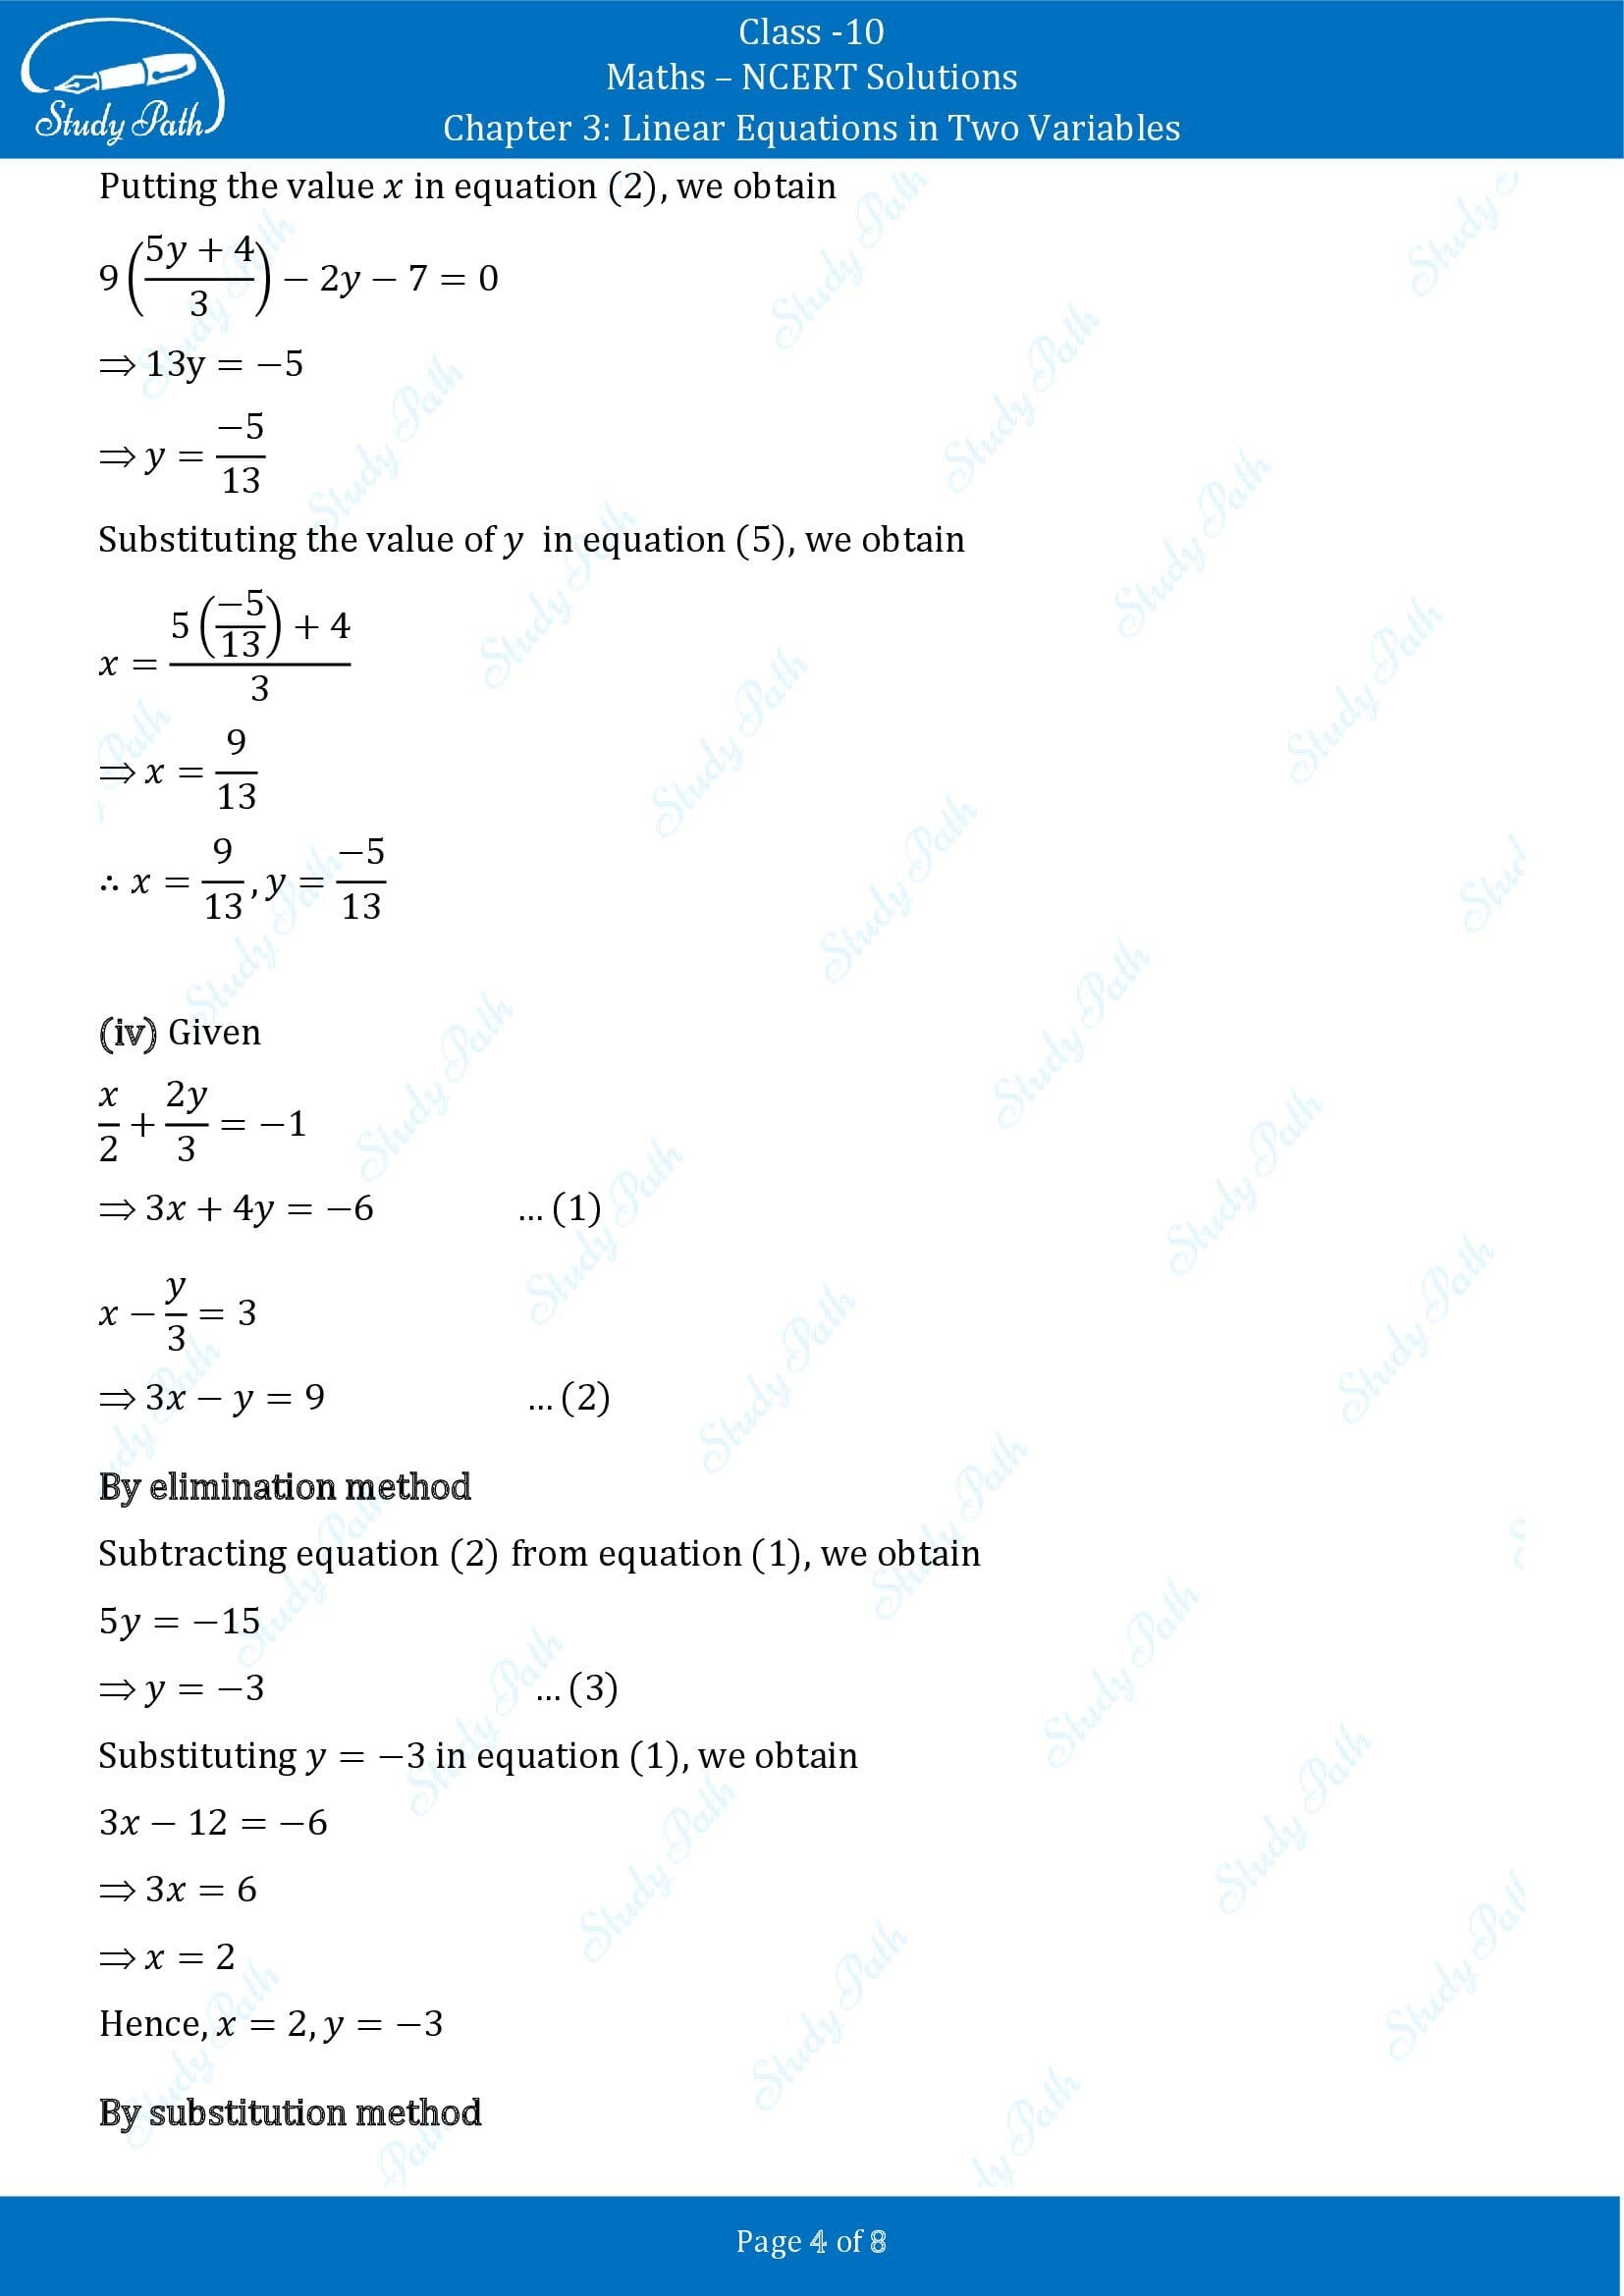 NCERT Solutions for Class 10 Maths Chapter 3 Linear Equations in Two Variables Exercise 3.4 00004